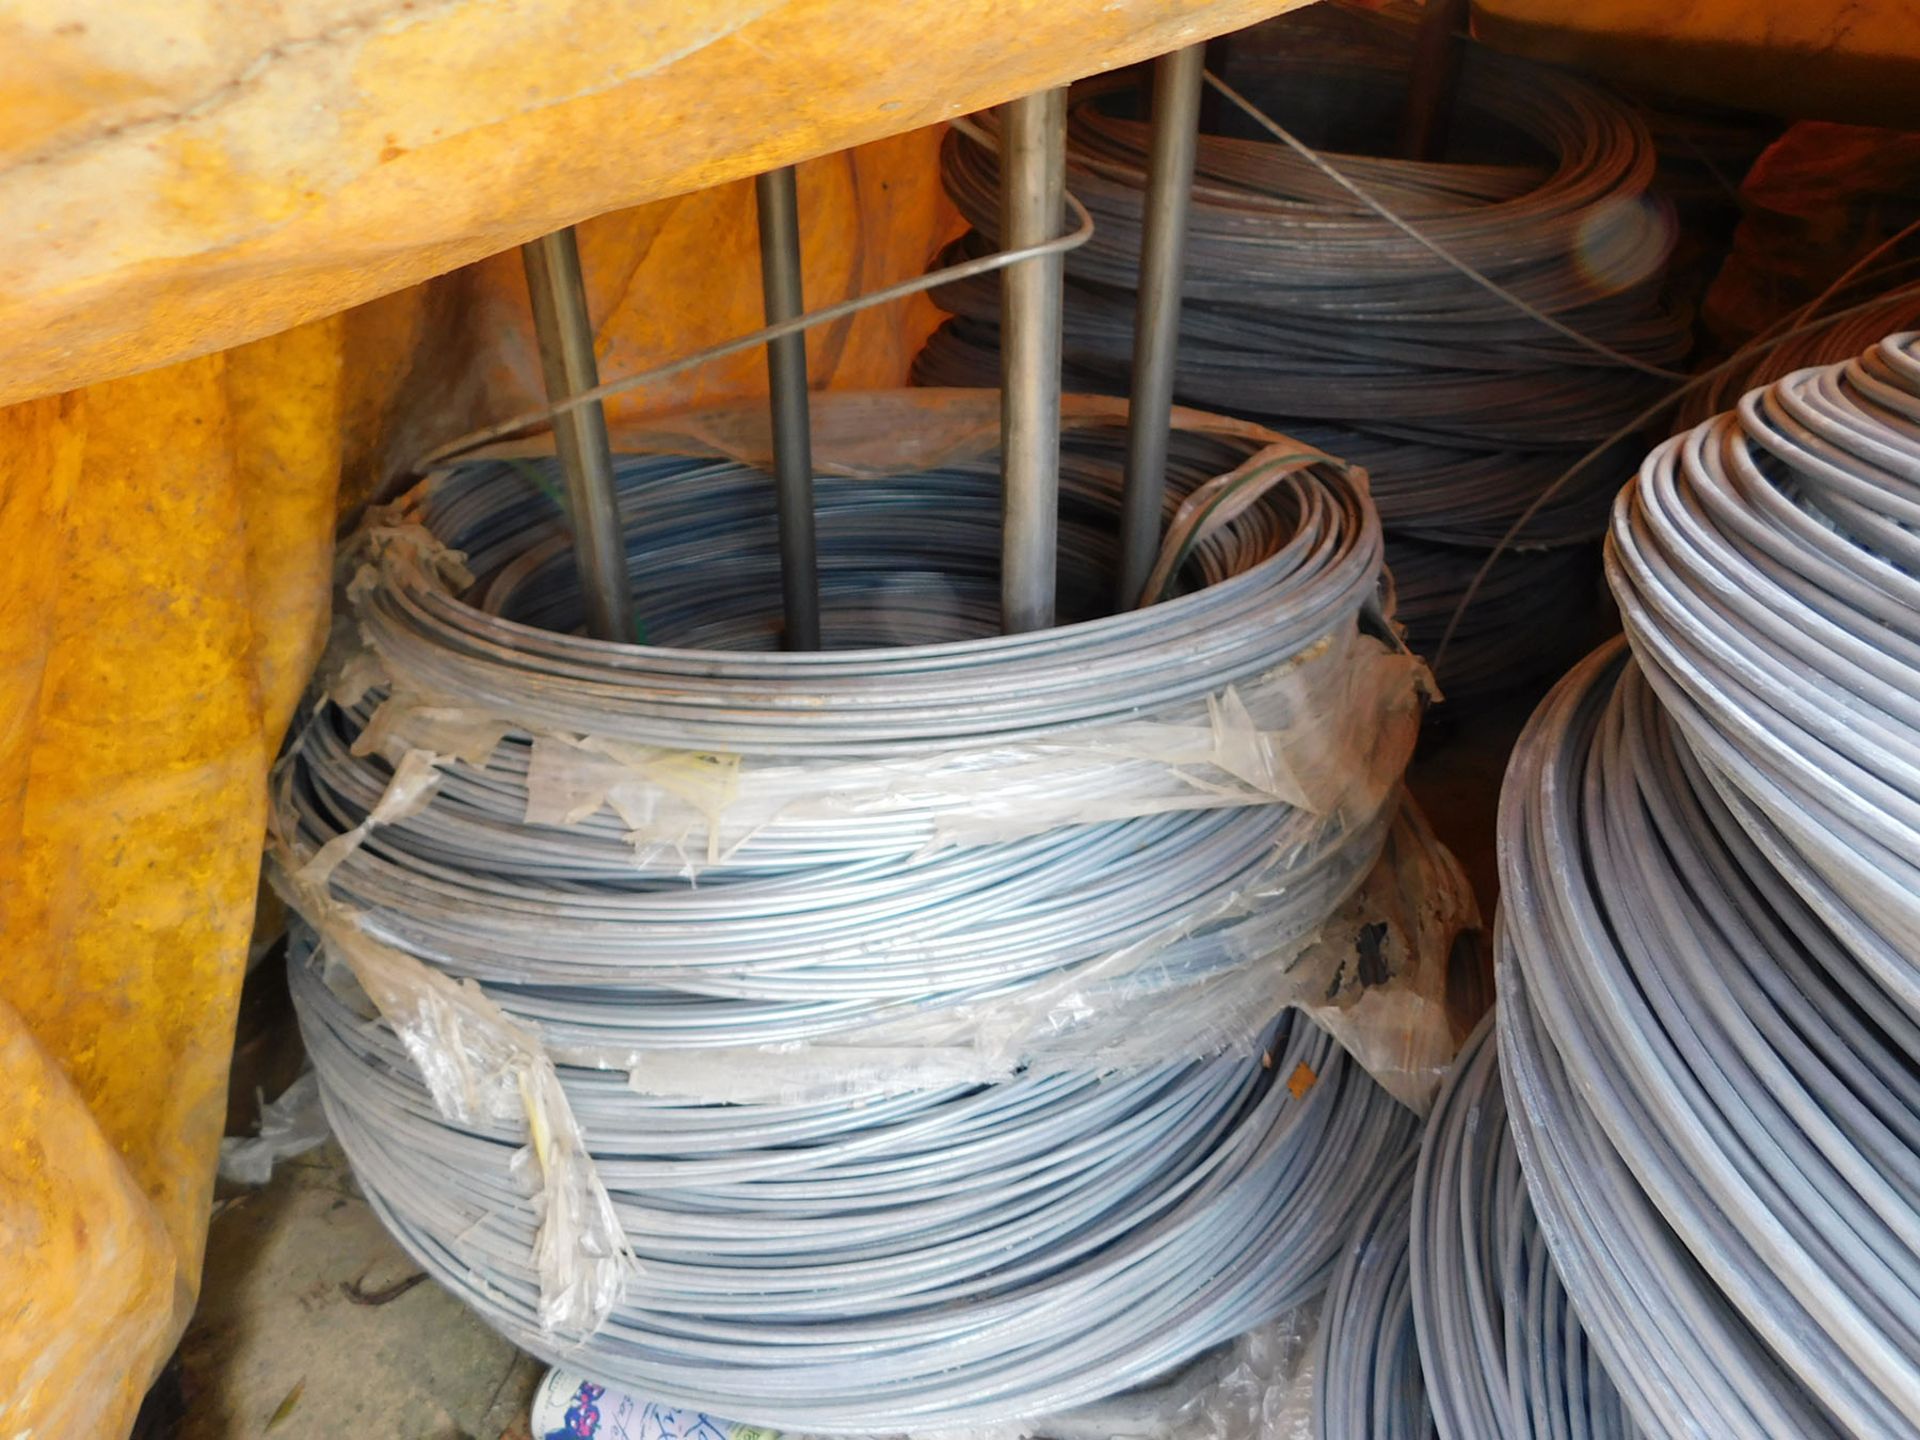 LOT OF MISC. GAUGED GALVANIZED WIRE & RACKS - Image 2 of 2